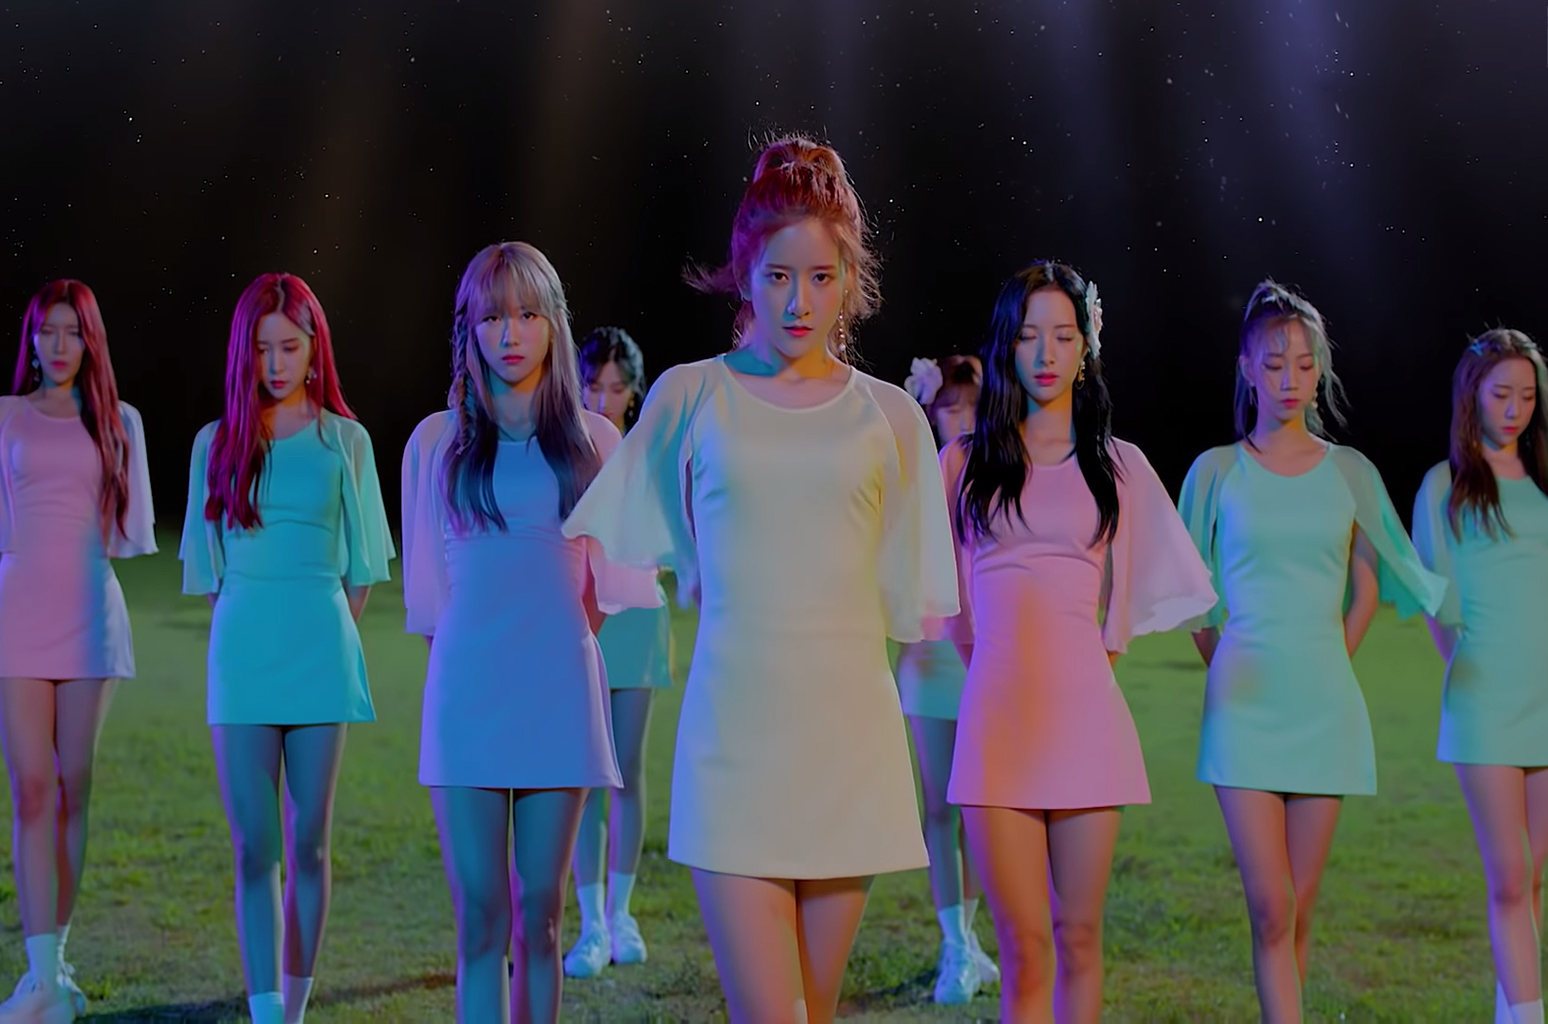 WJSN Return With 'Save Me, Save You' Video: Watch